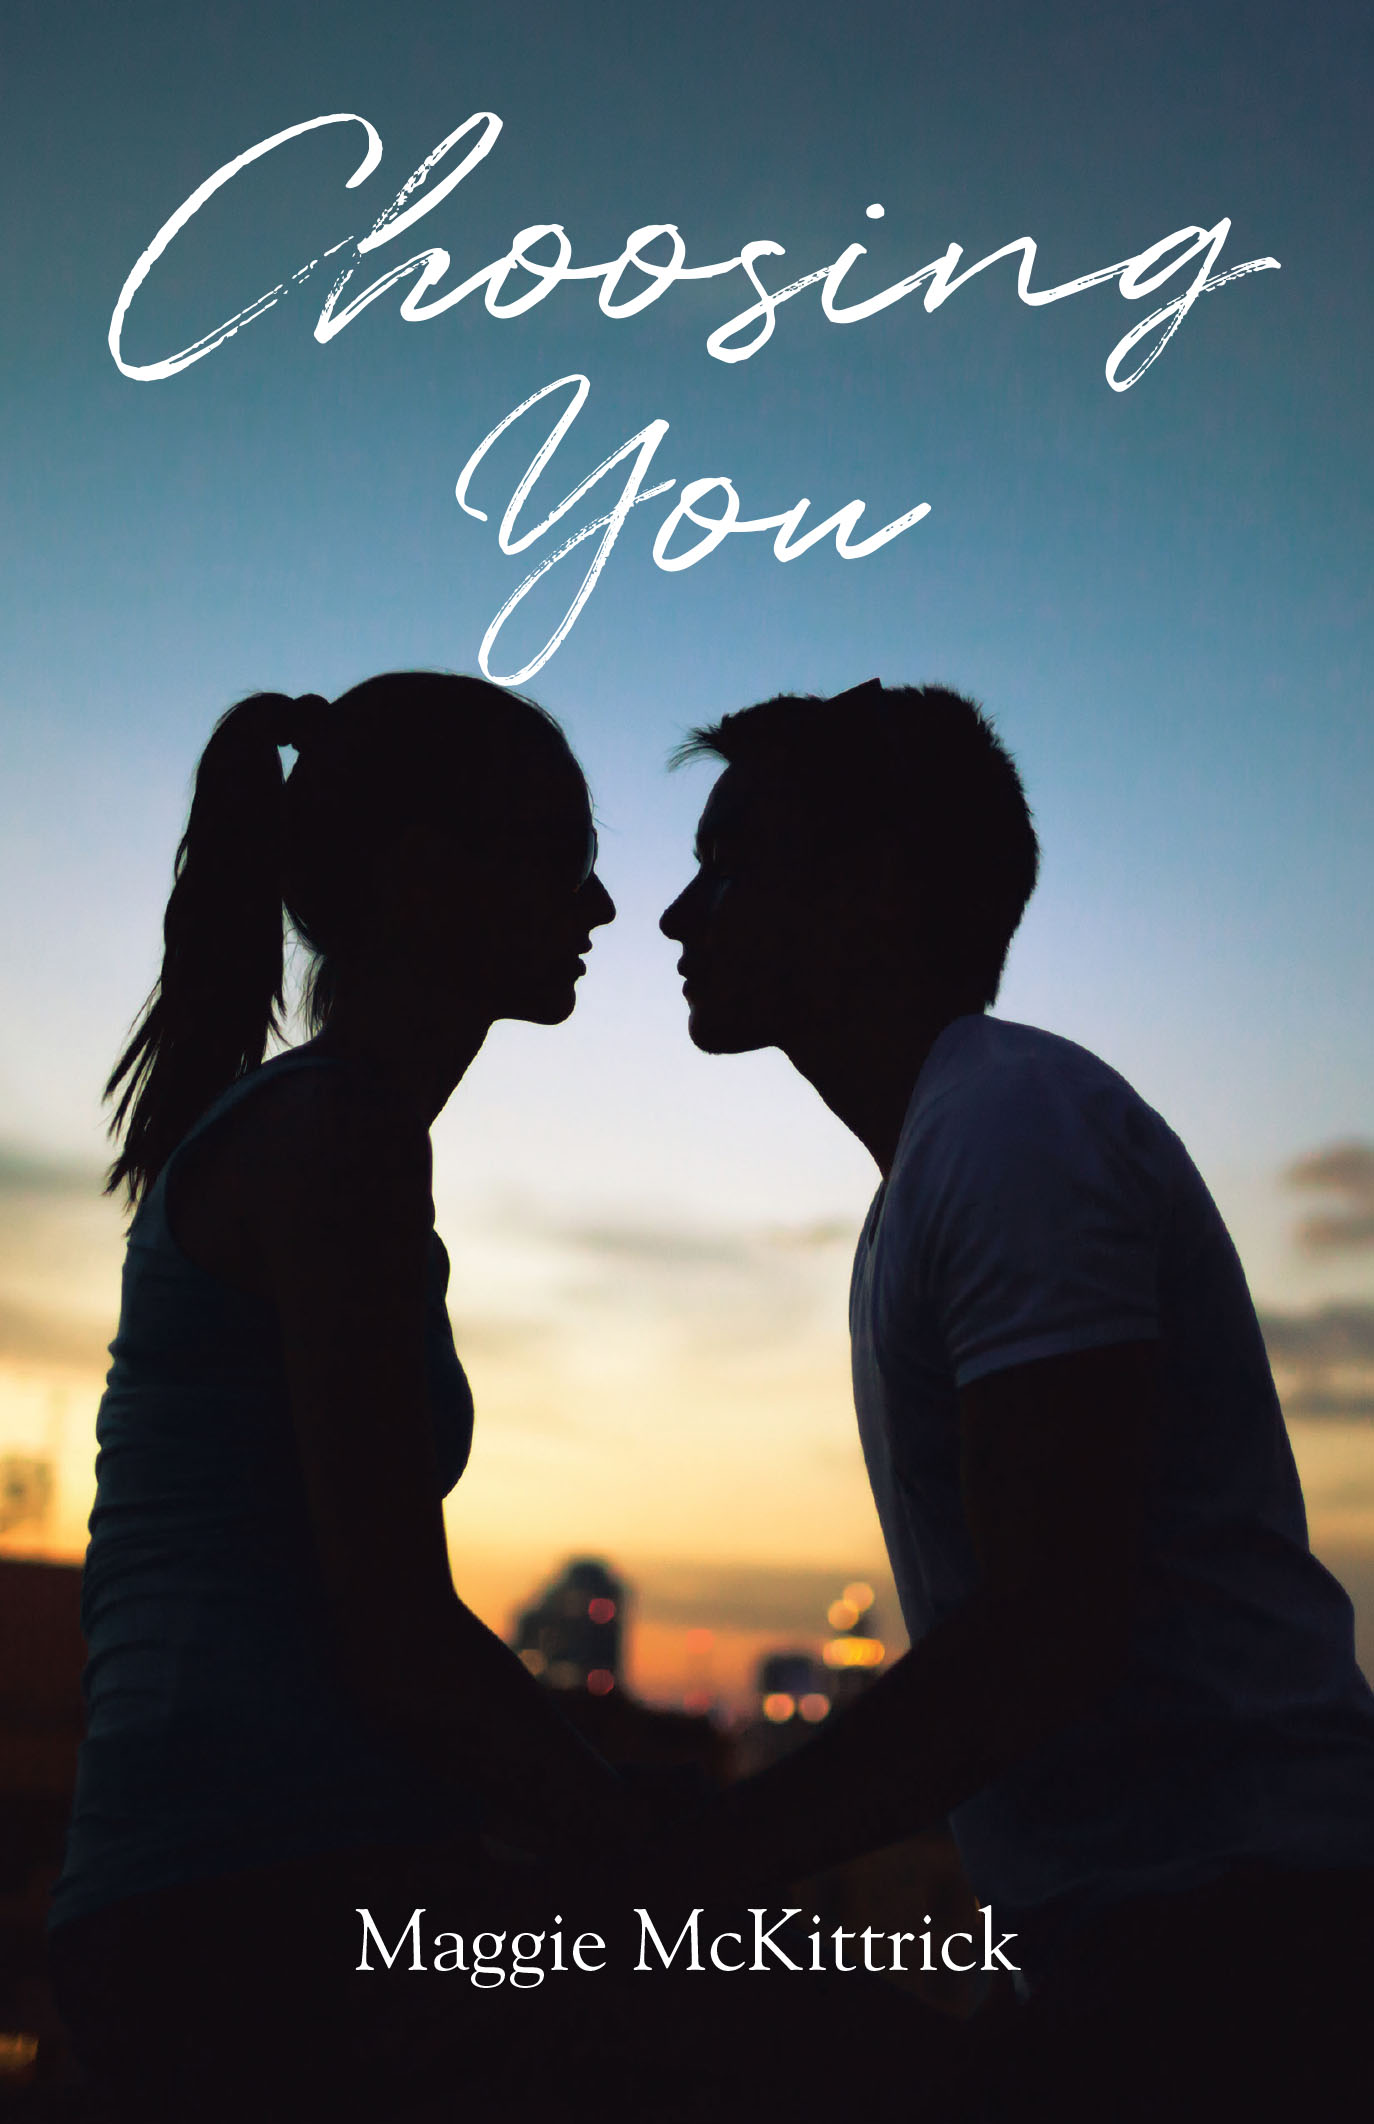 Maggie McKittrick’s Newly Released "Choosing You" is a Heartfelt Tale of Love and Second Chances